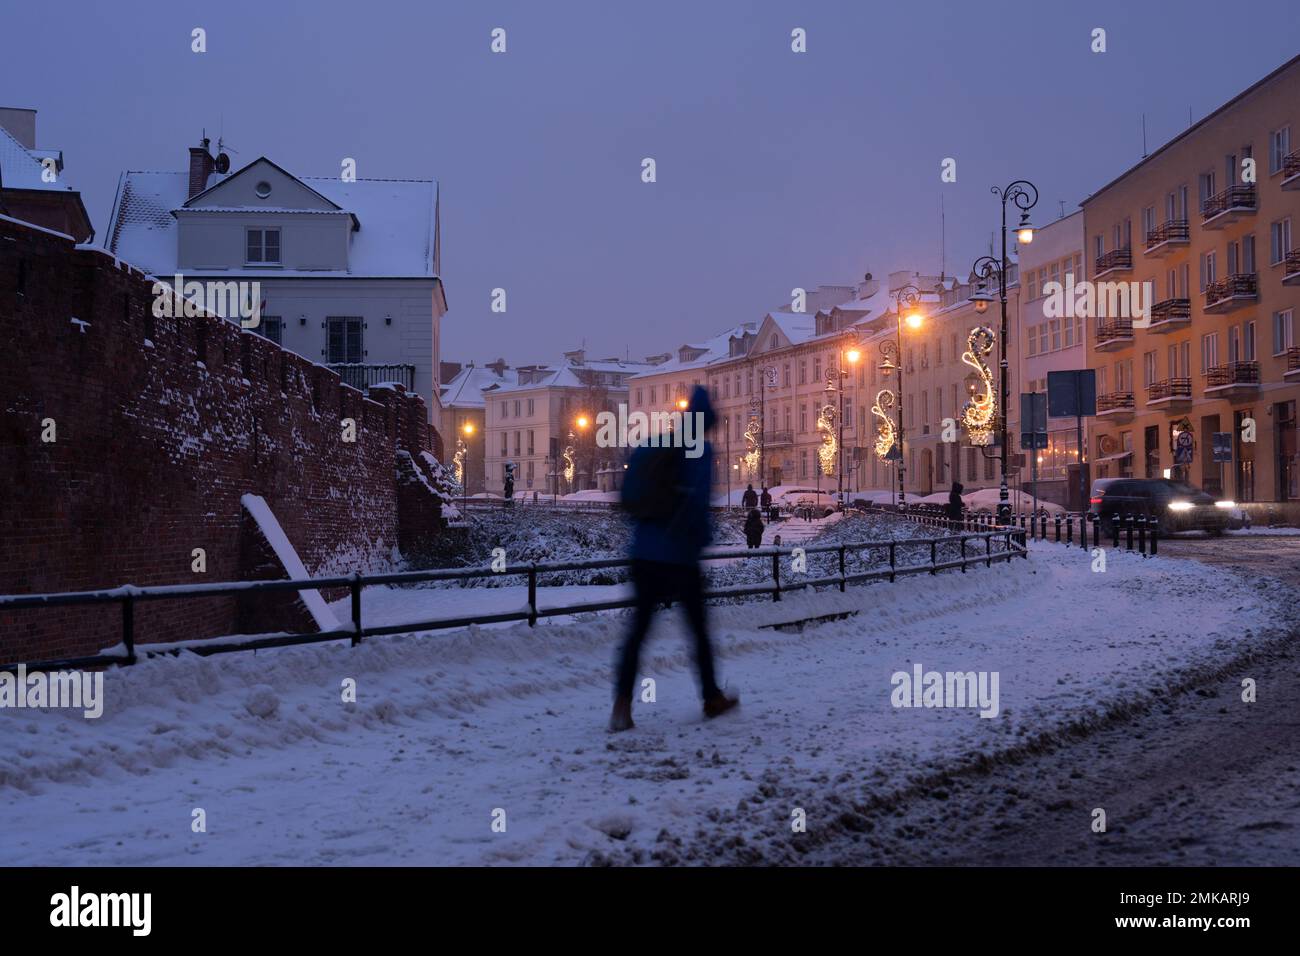 People walking the snowed streets of Warshaw during the holiday seasons Stock Photo